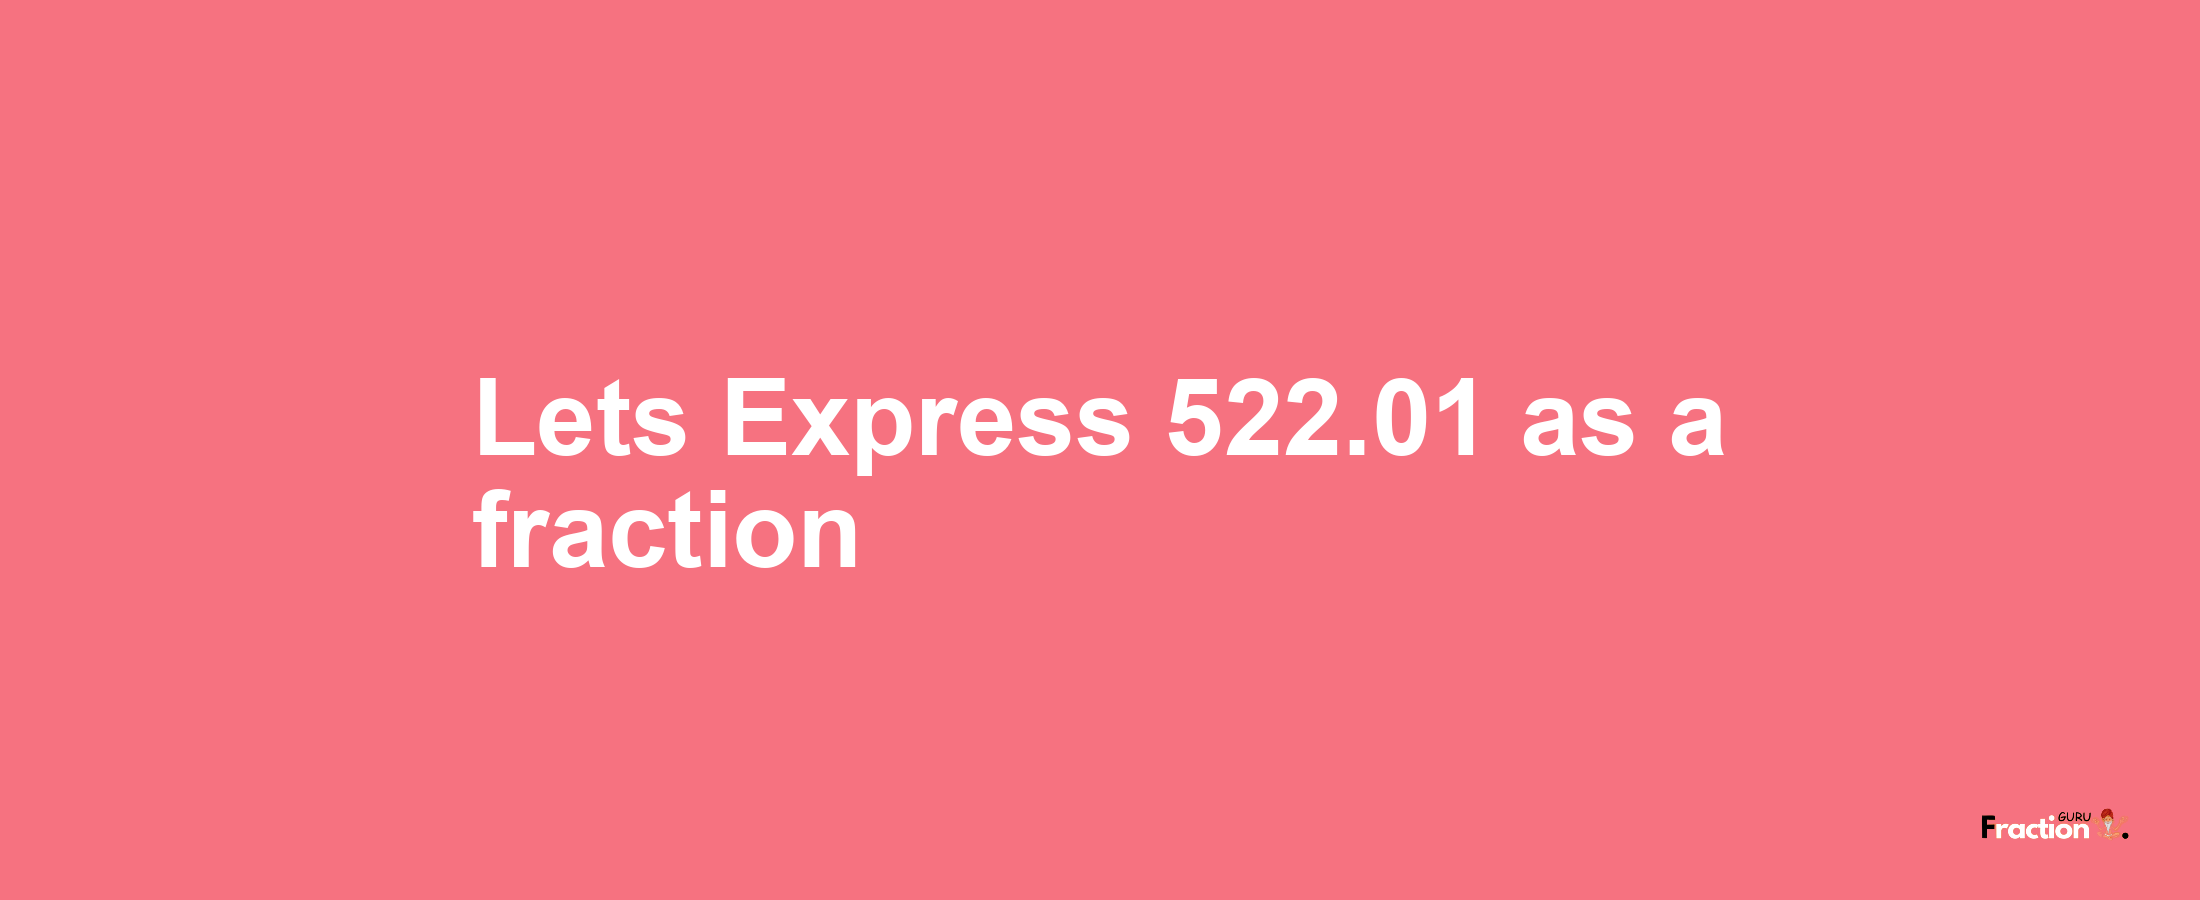 Lets Express 522.01 as afraction